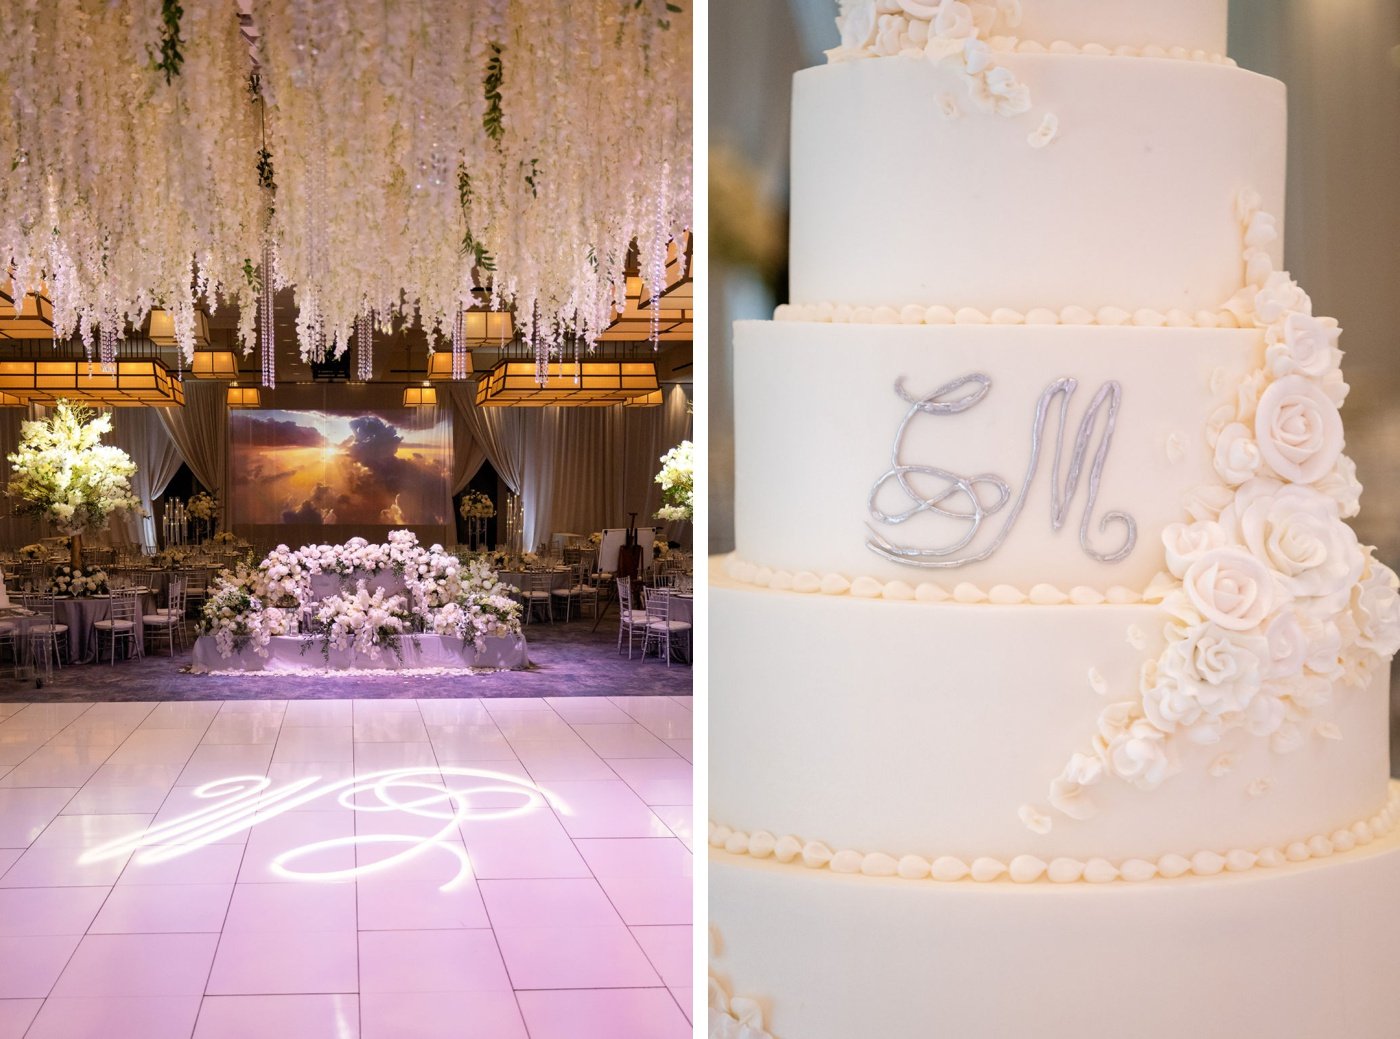 Custom monogram with the bride and groom's initials on a wedding cake